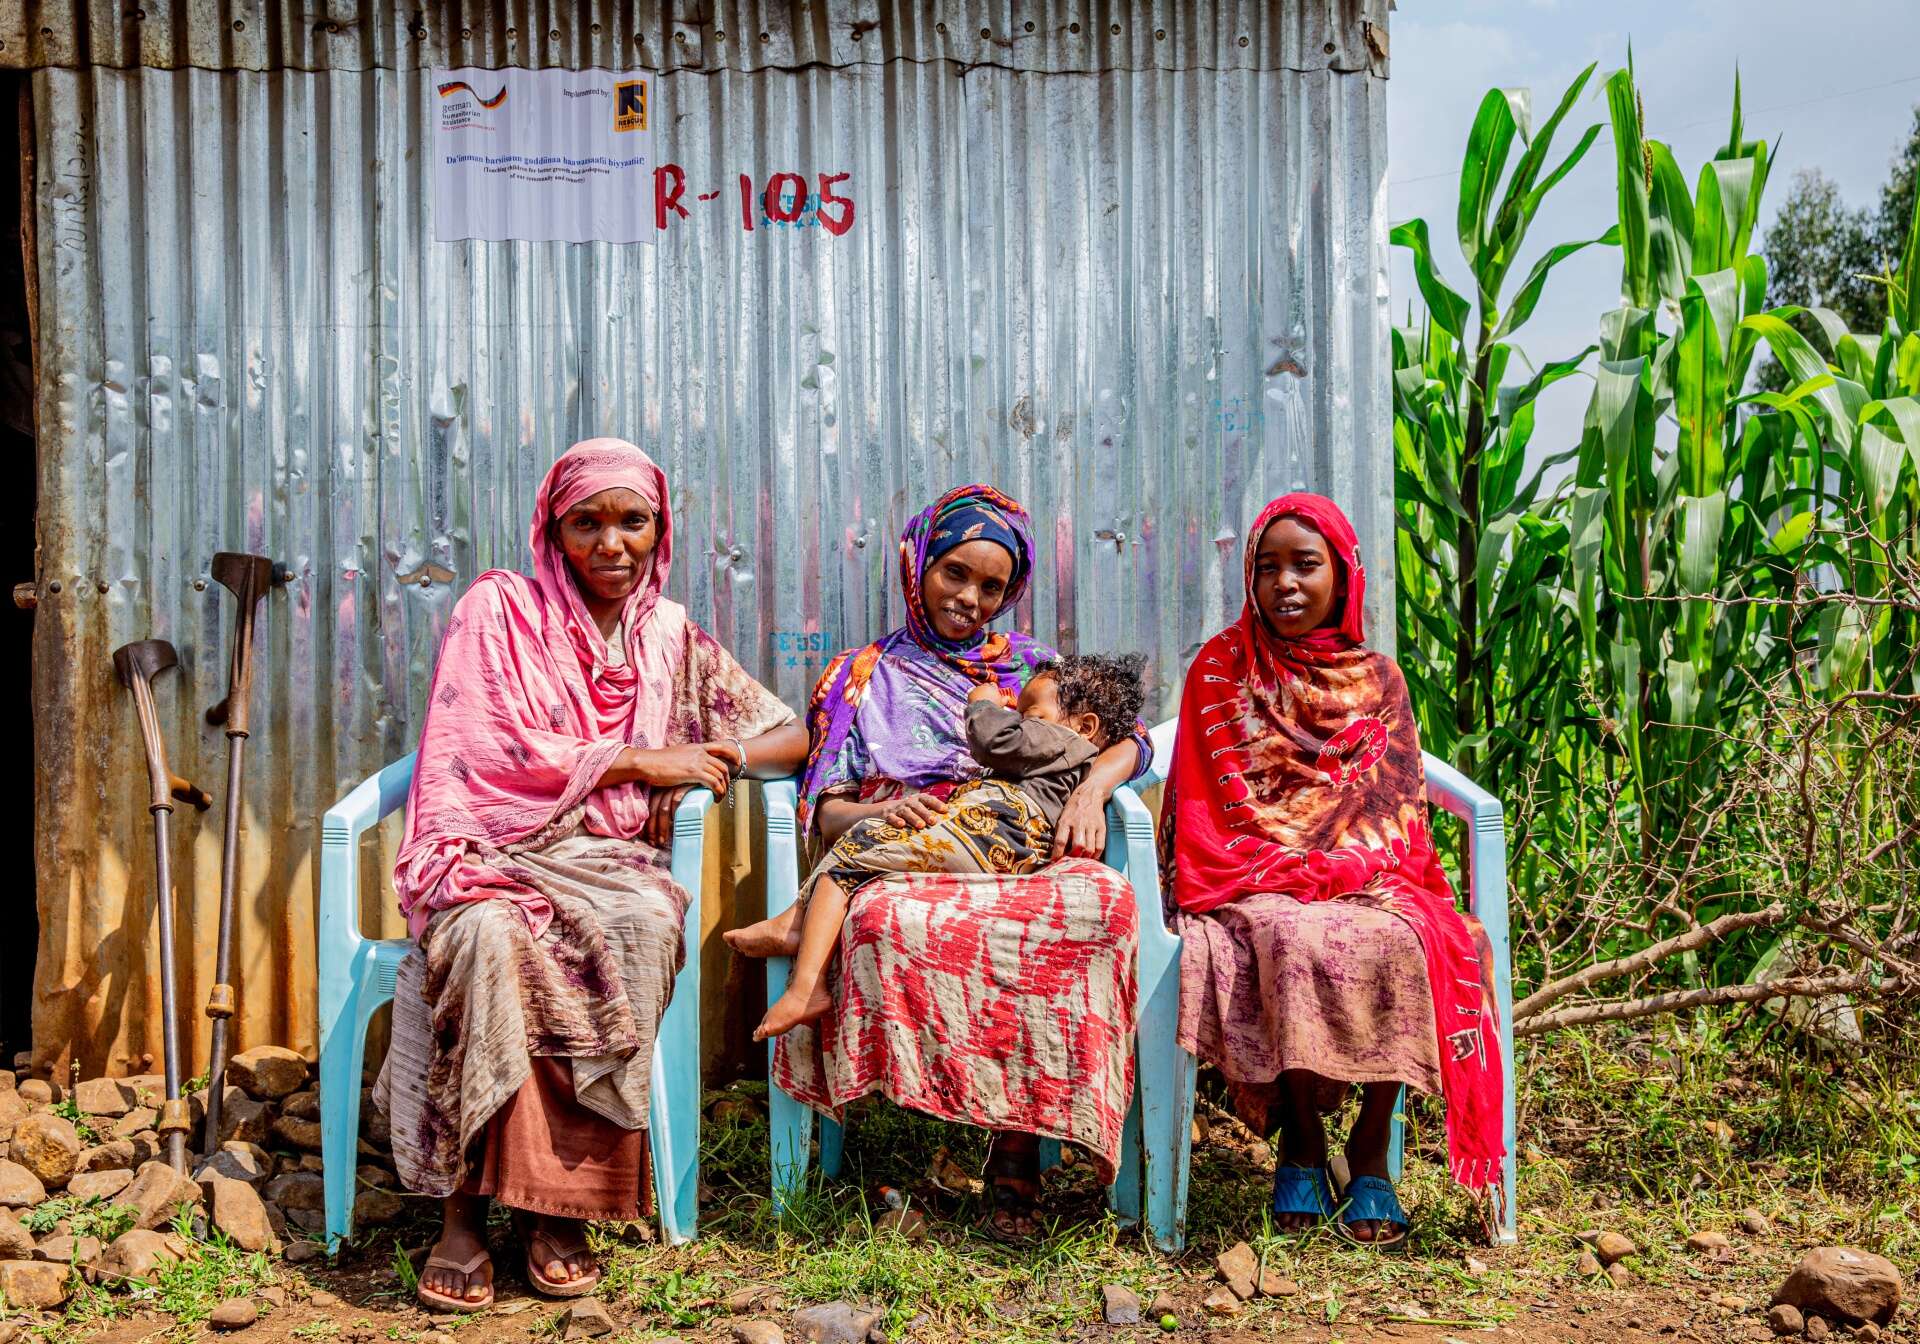 Three women sit in chairs outside and pose for a photo. The woman in the middle holds a young child in her arms.